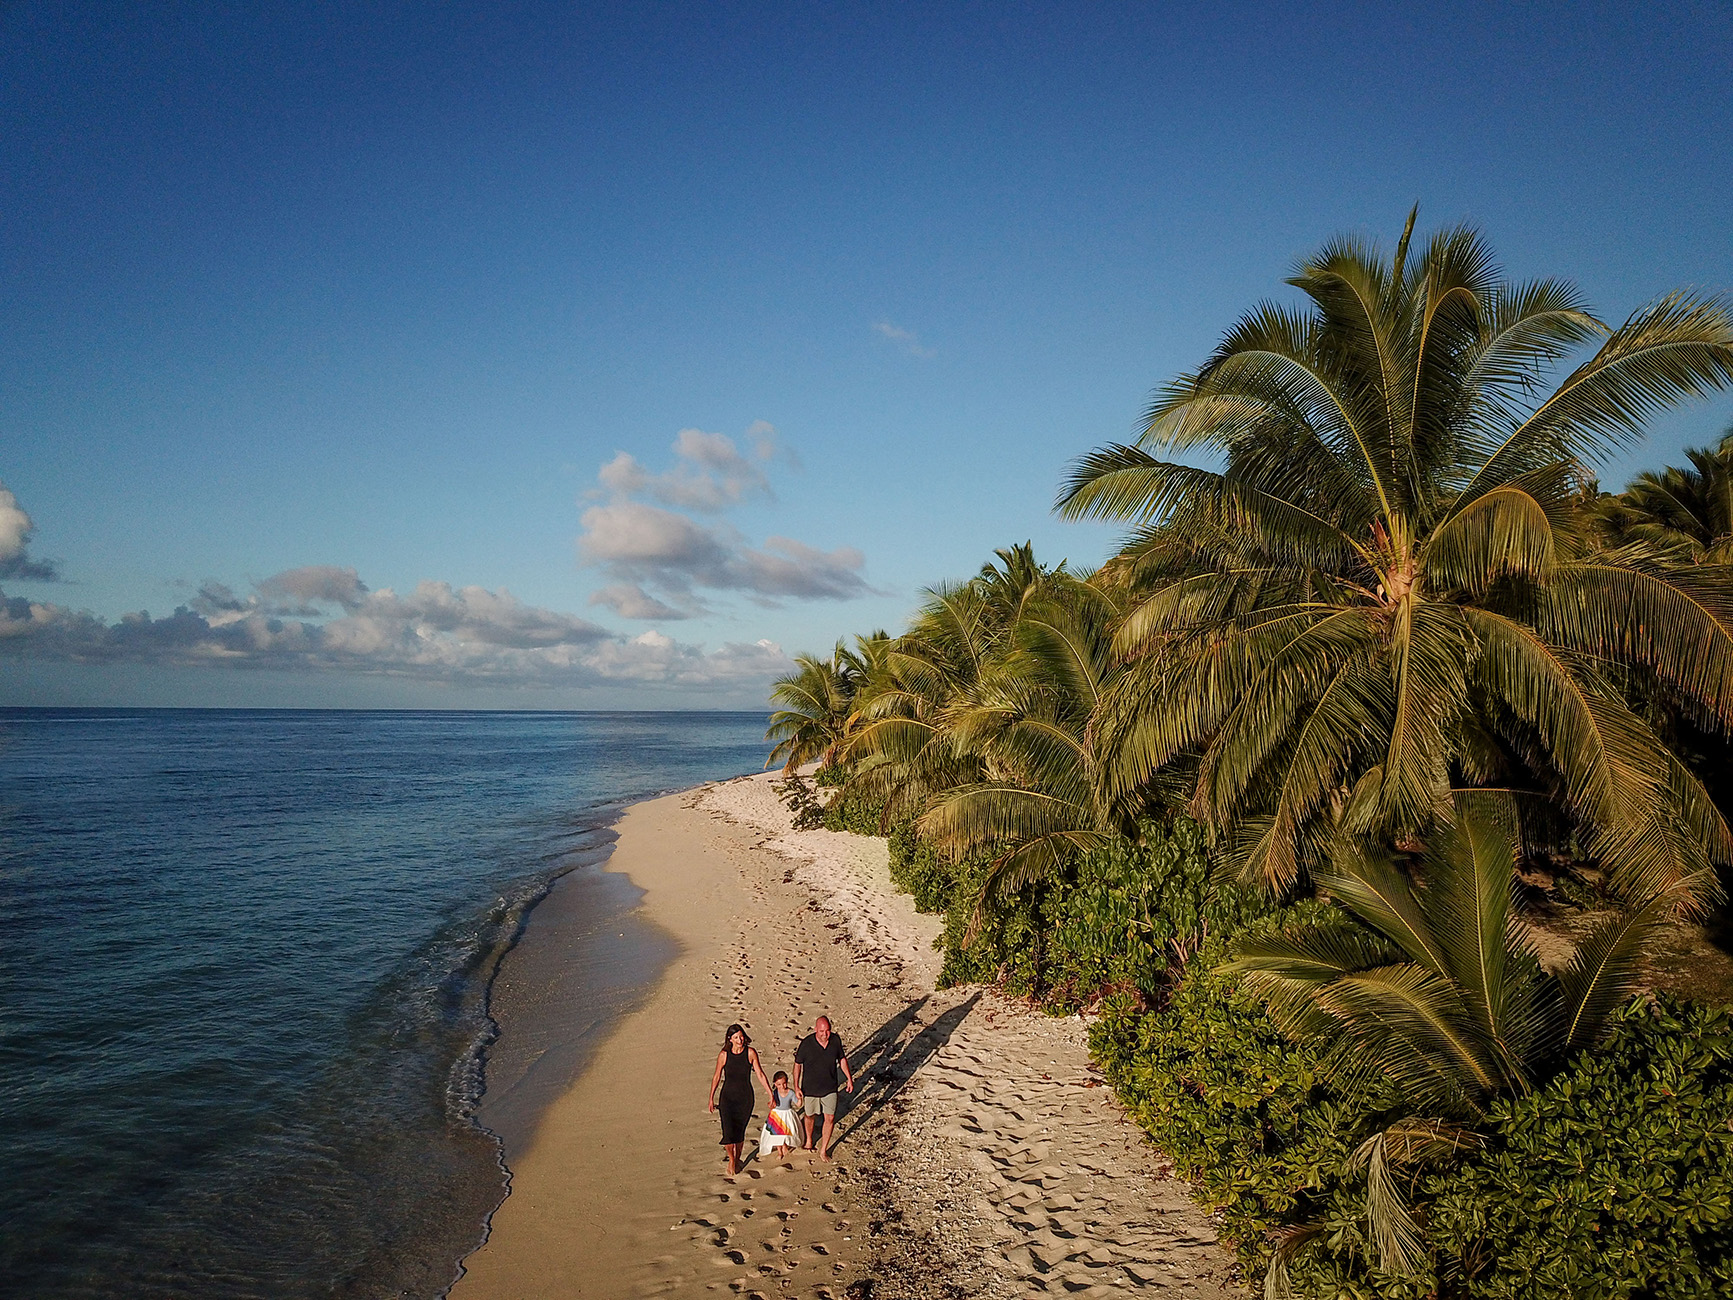 An aerial view of the family strolling on the beach of Vomo Island